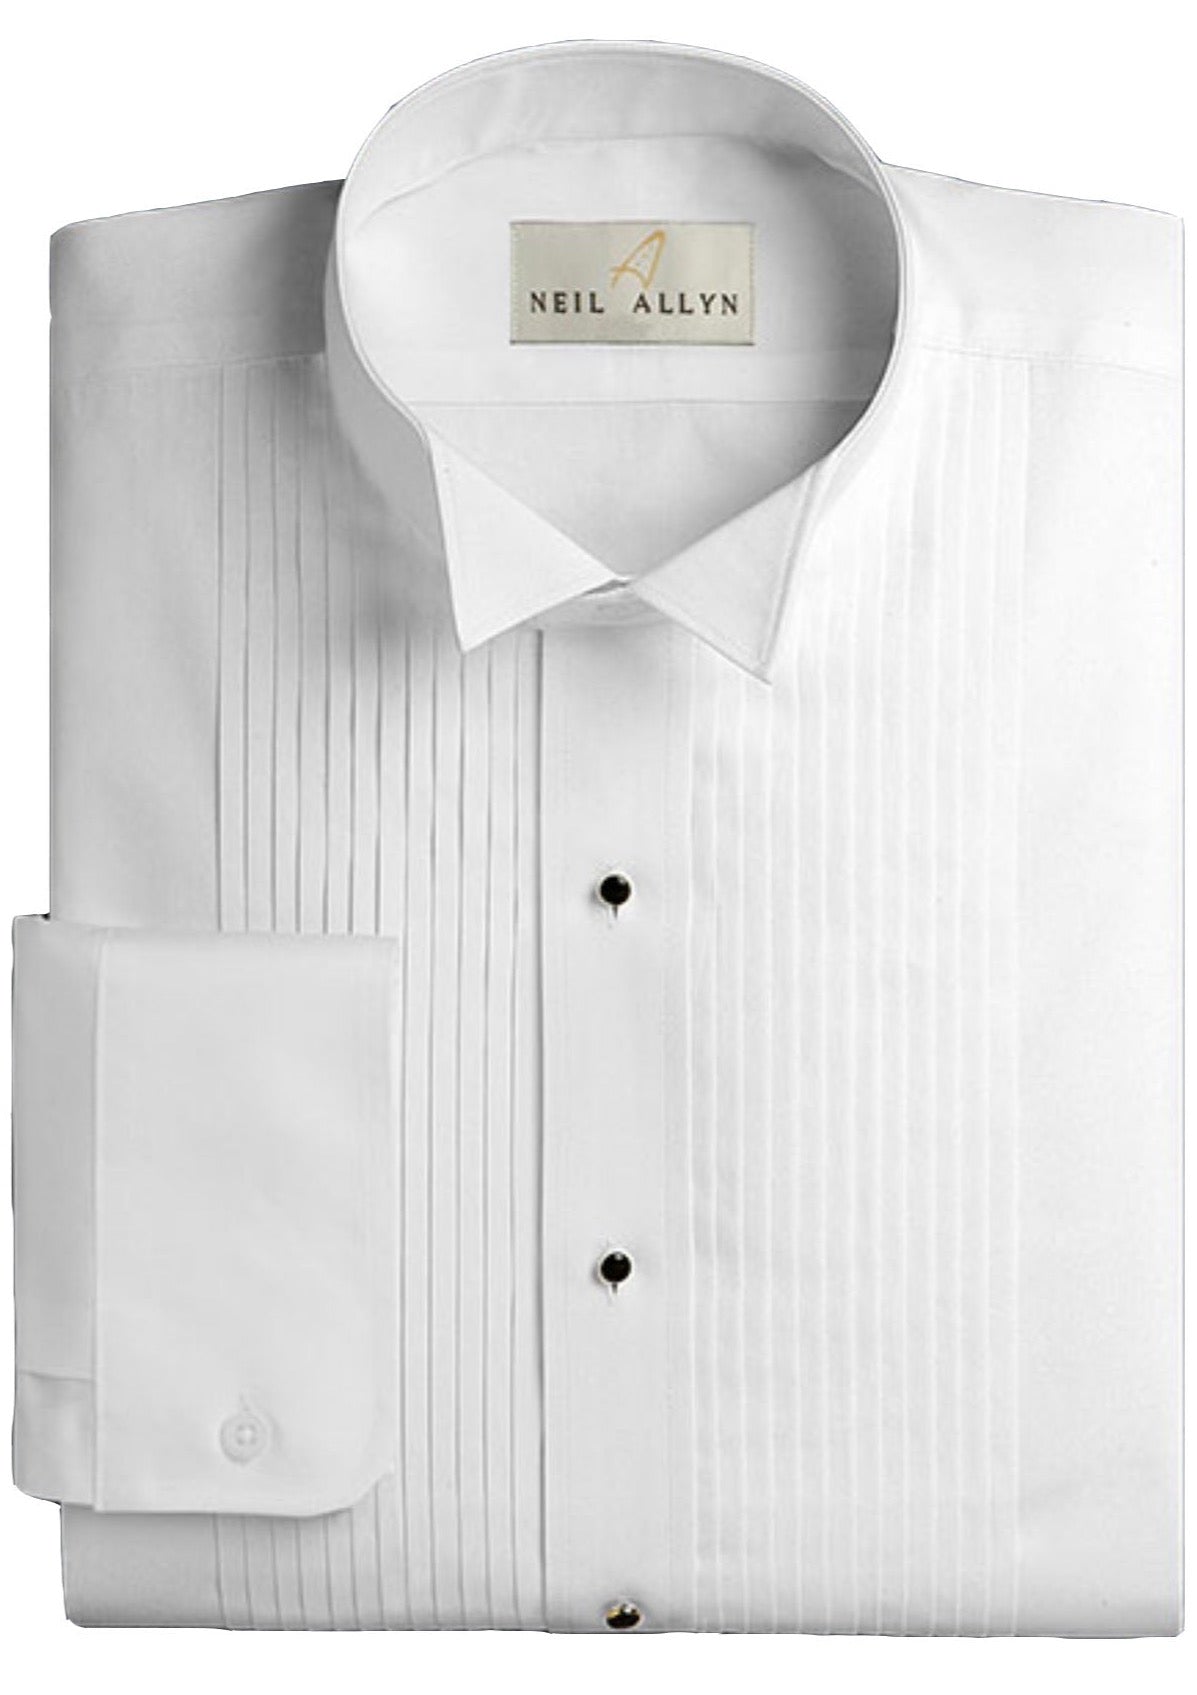 Neil Allyn Slim Fit Wing Collar Tuxedo Shirt in a Polycotton Blend with 1/4" Pleats and Barrel Cuffs